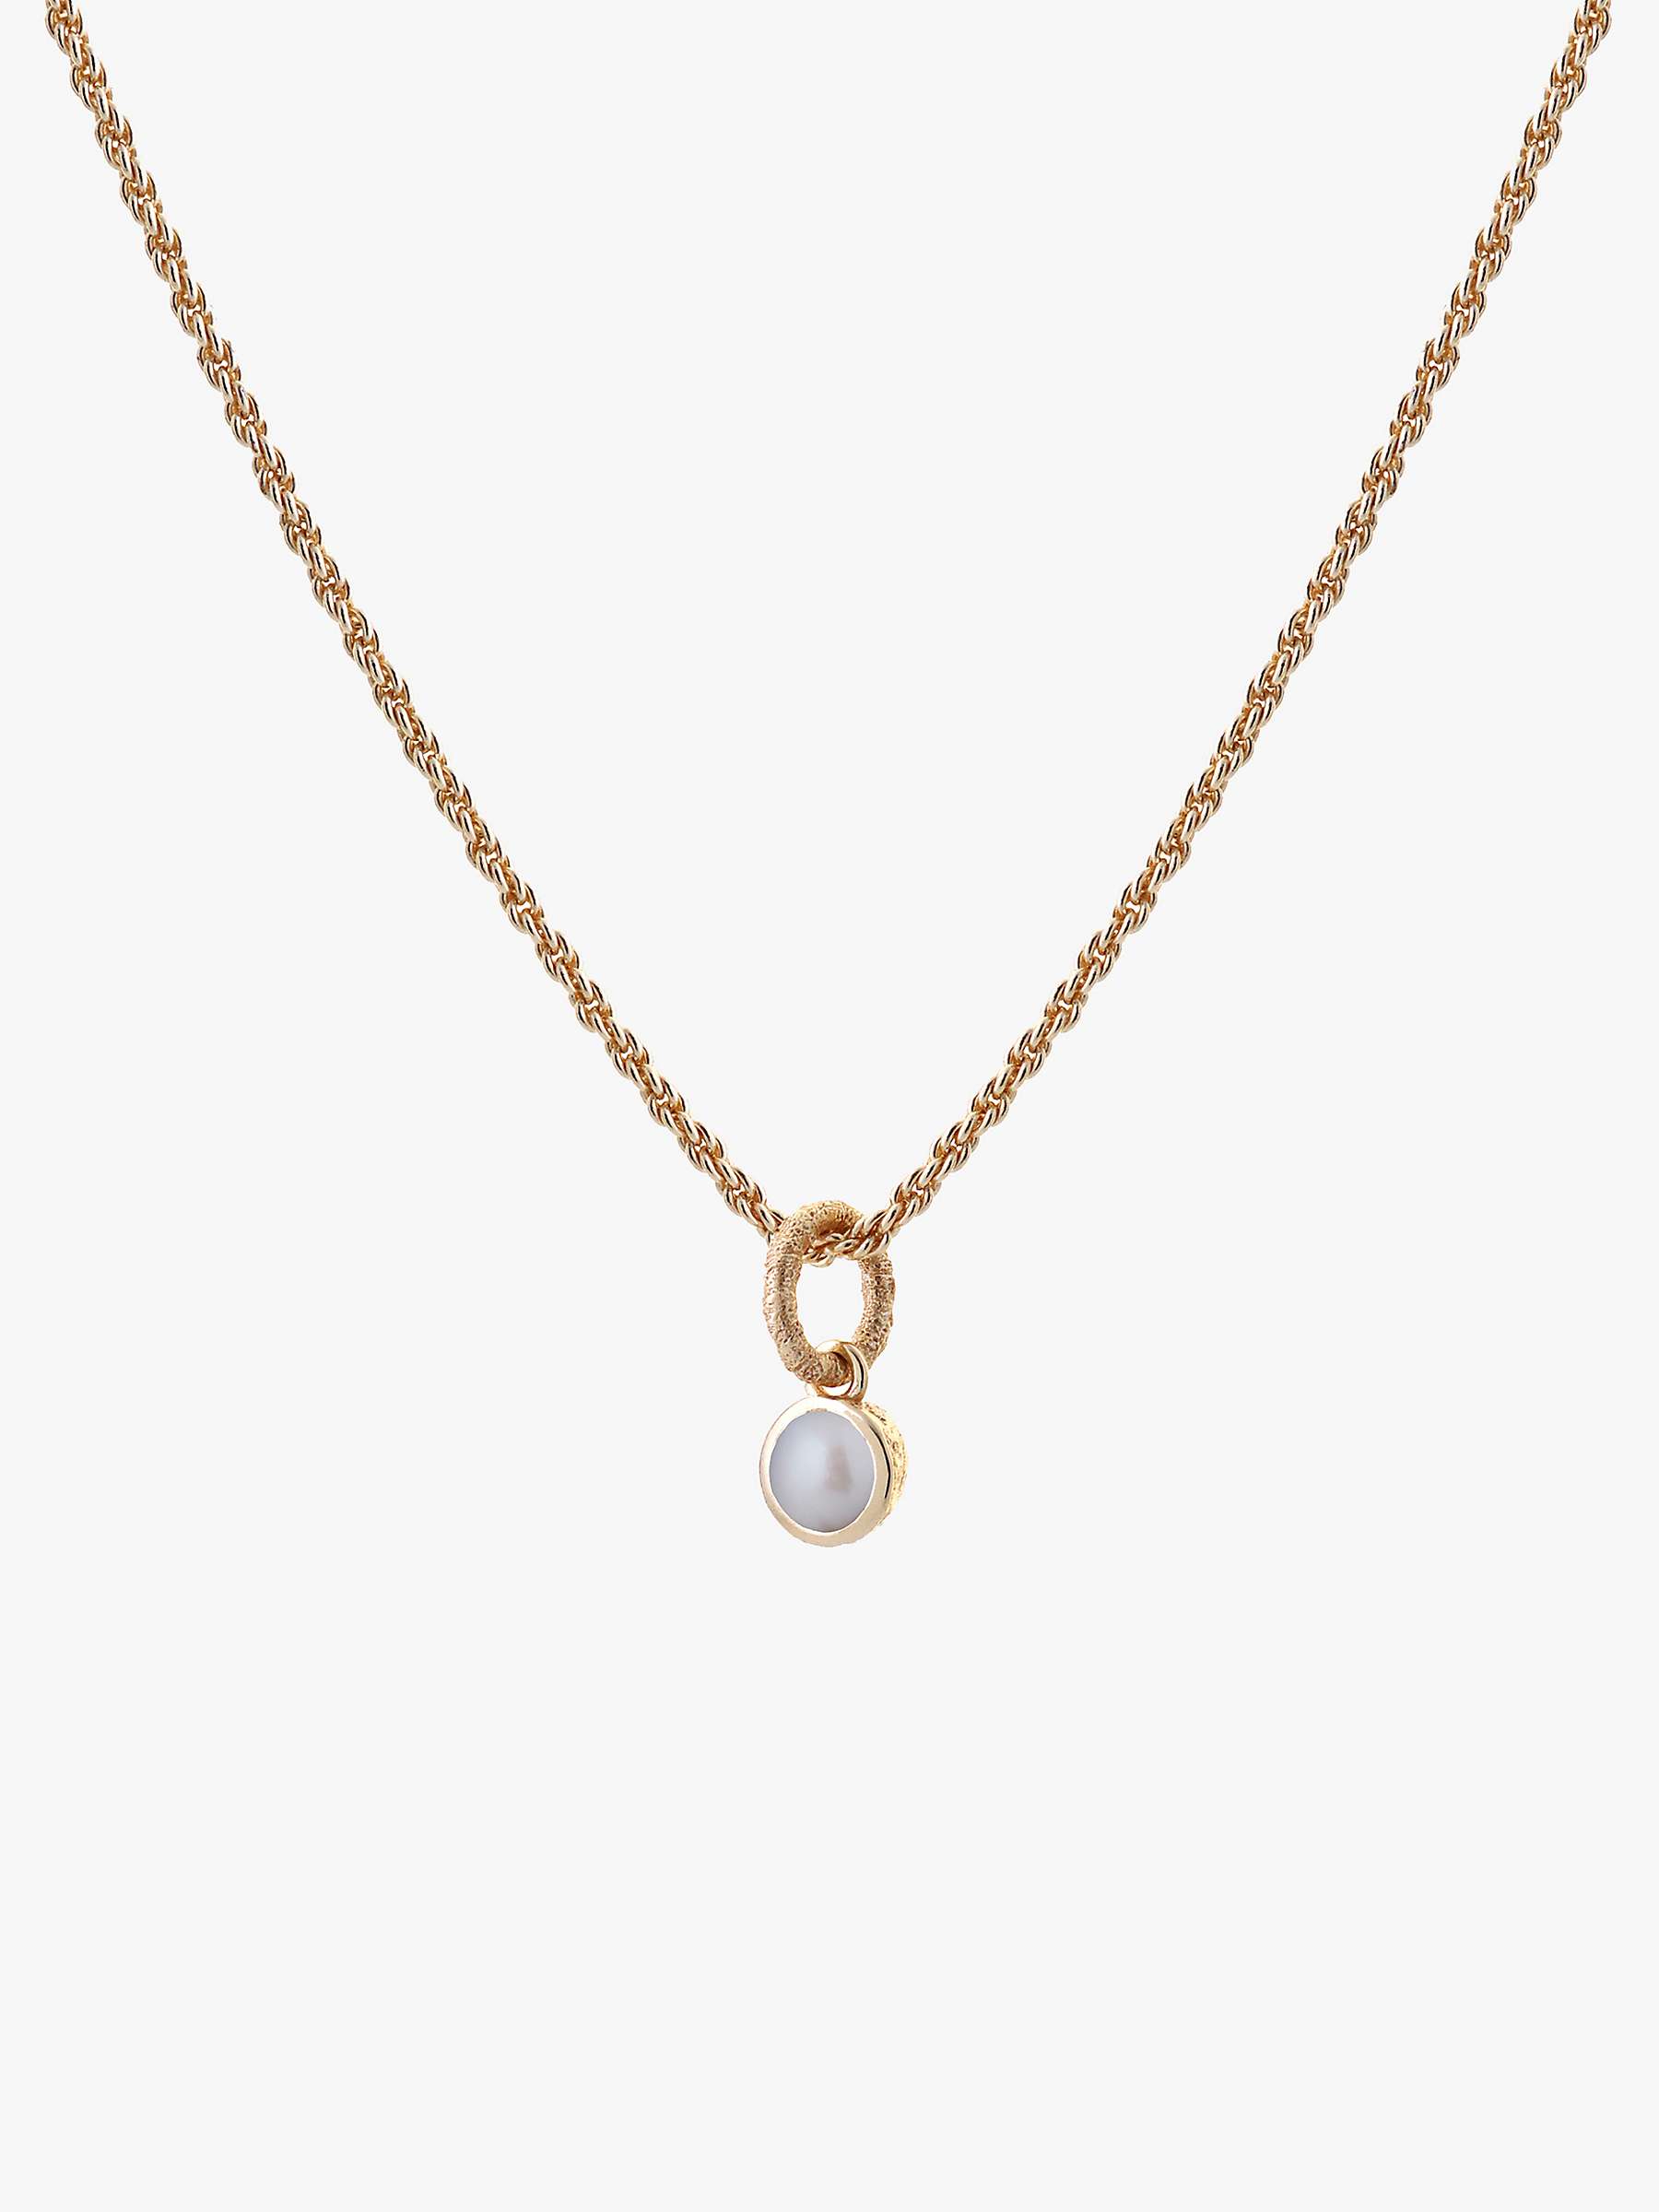 Buy Tutti & Co June Birthstone Necklace, Pearl Online at johnlewis.com